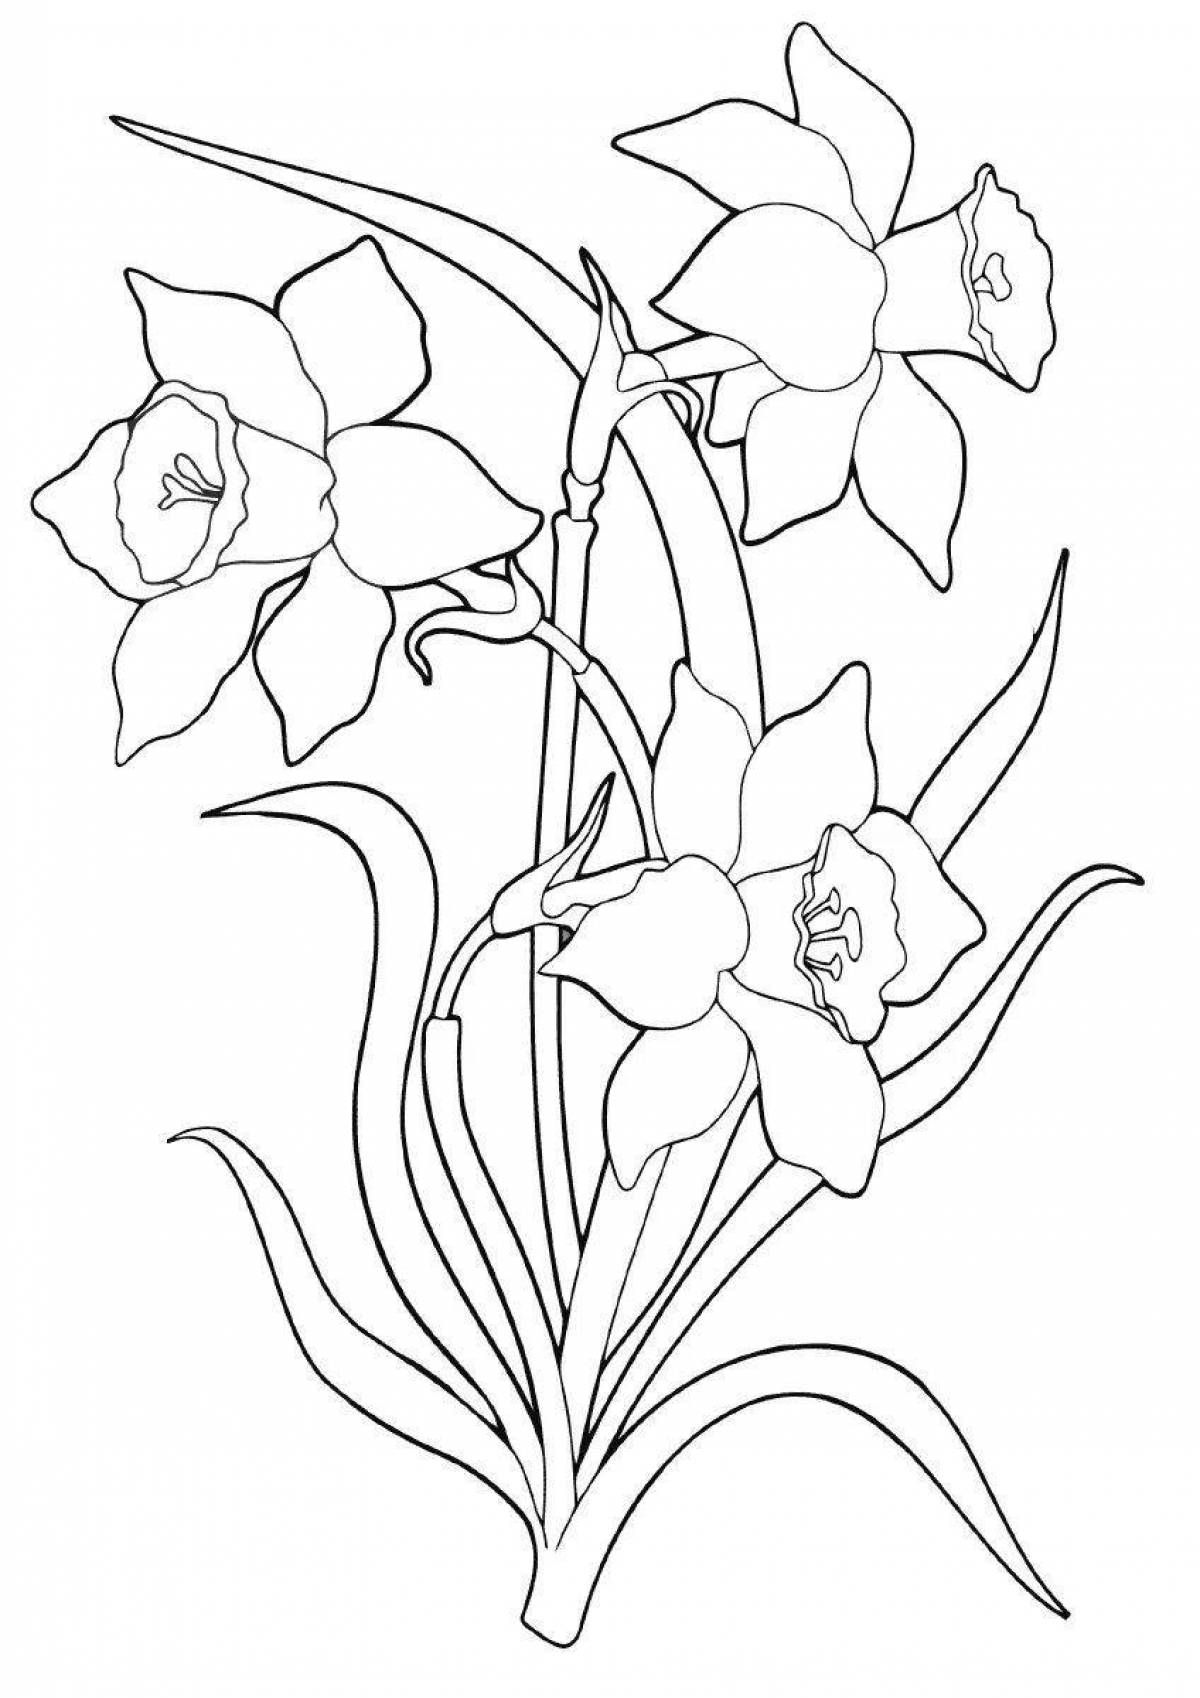 Coloring book shining narcissus flower